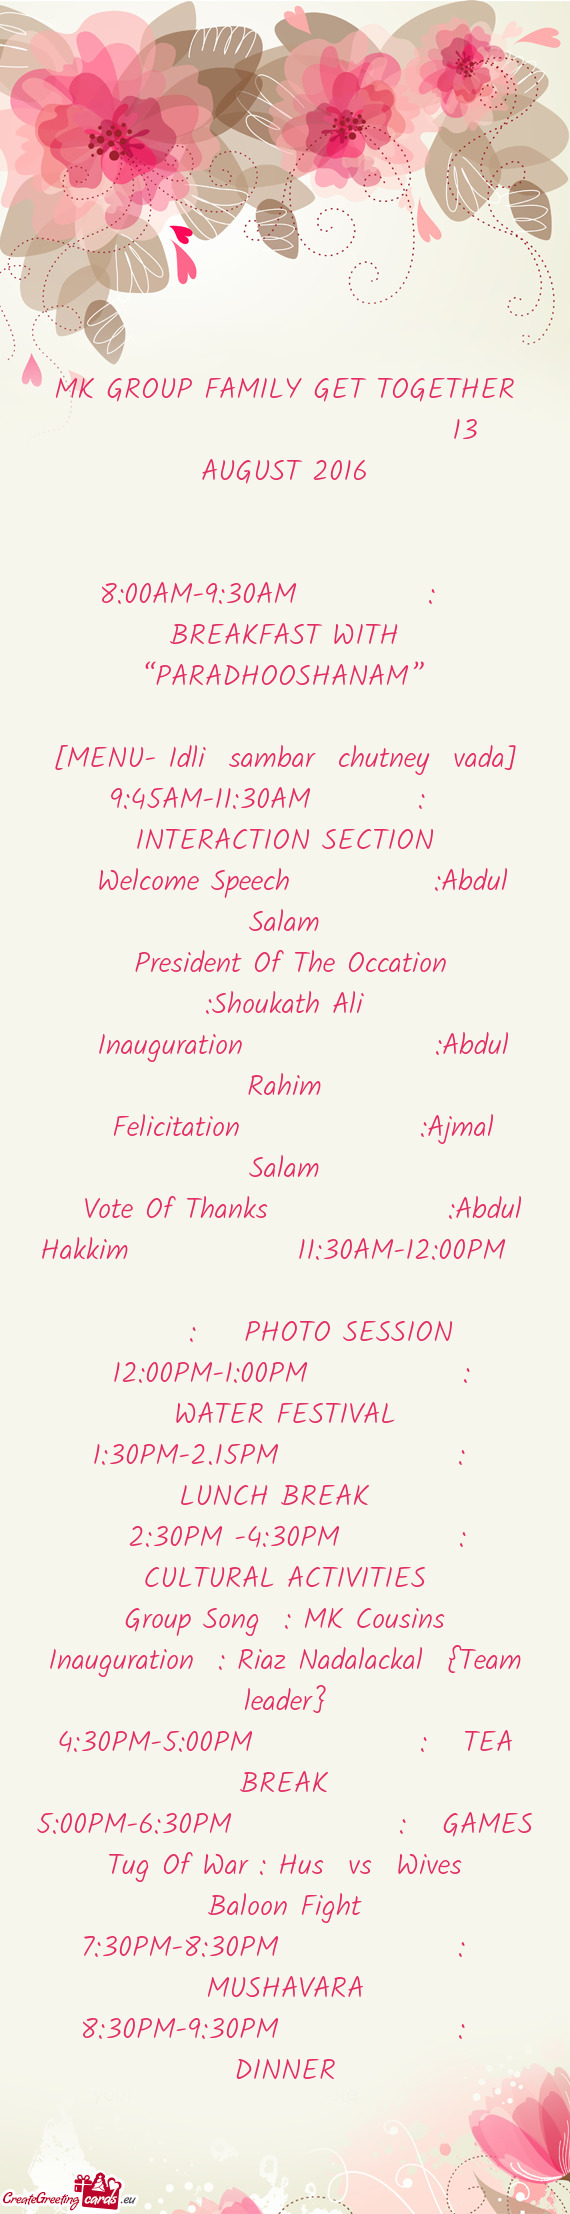 9:45AM-11:30AM   : INTERACTION SECTION